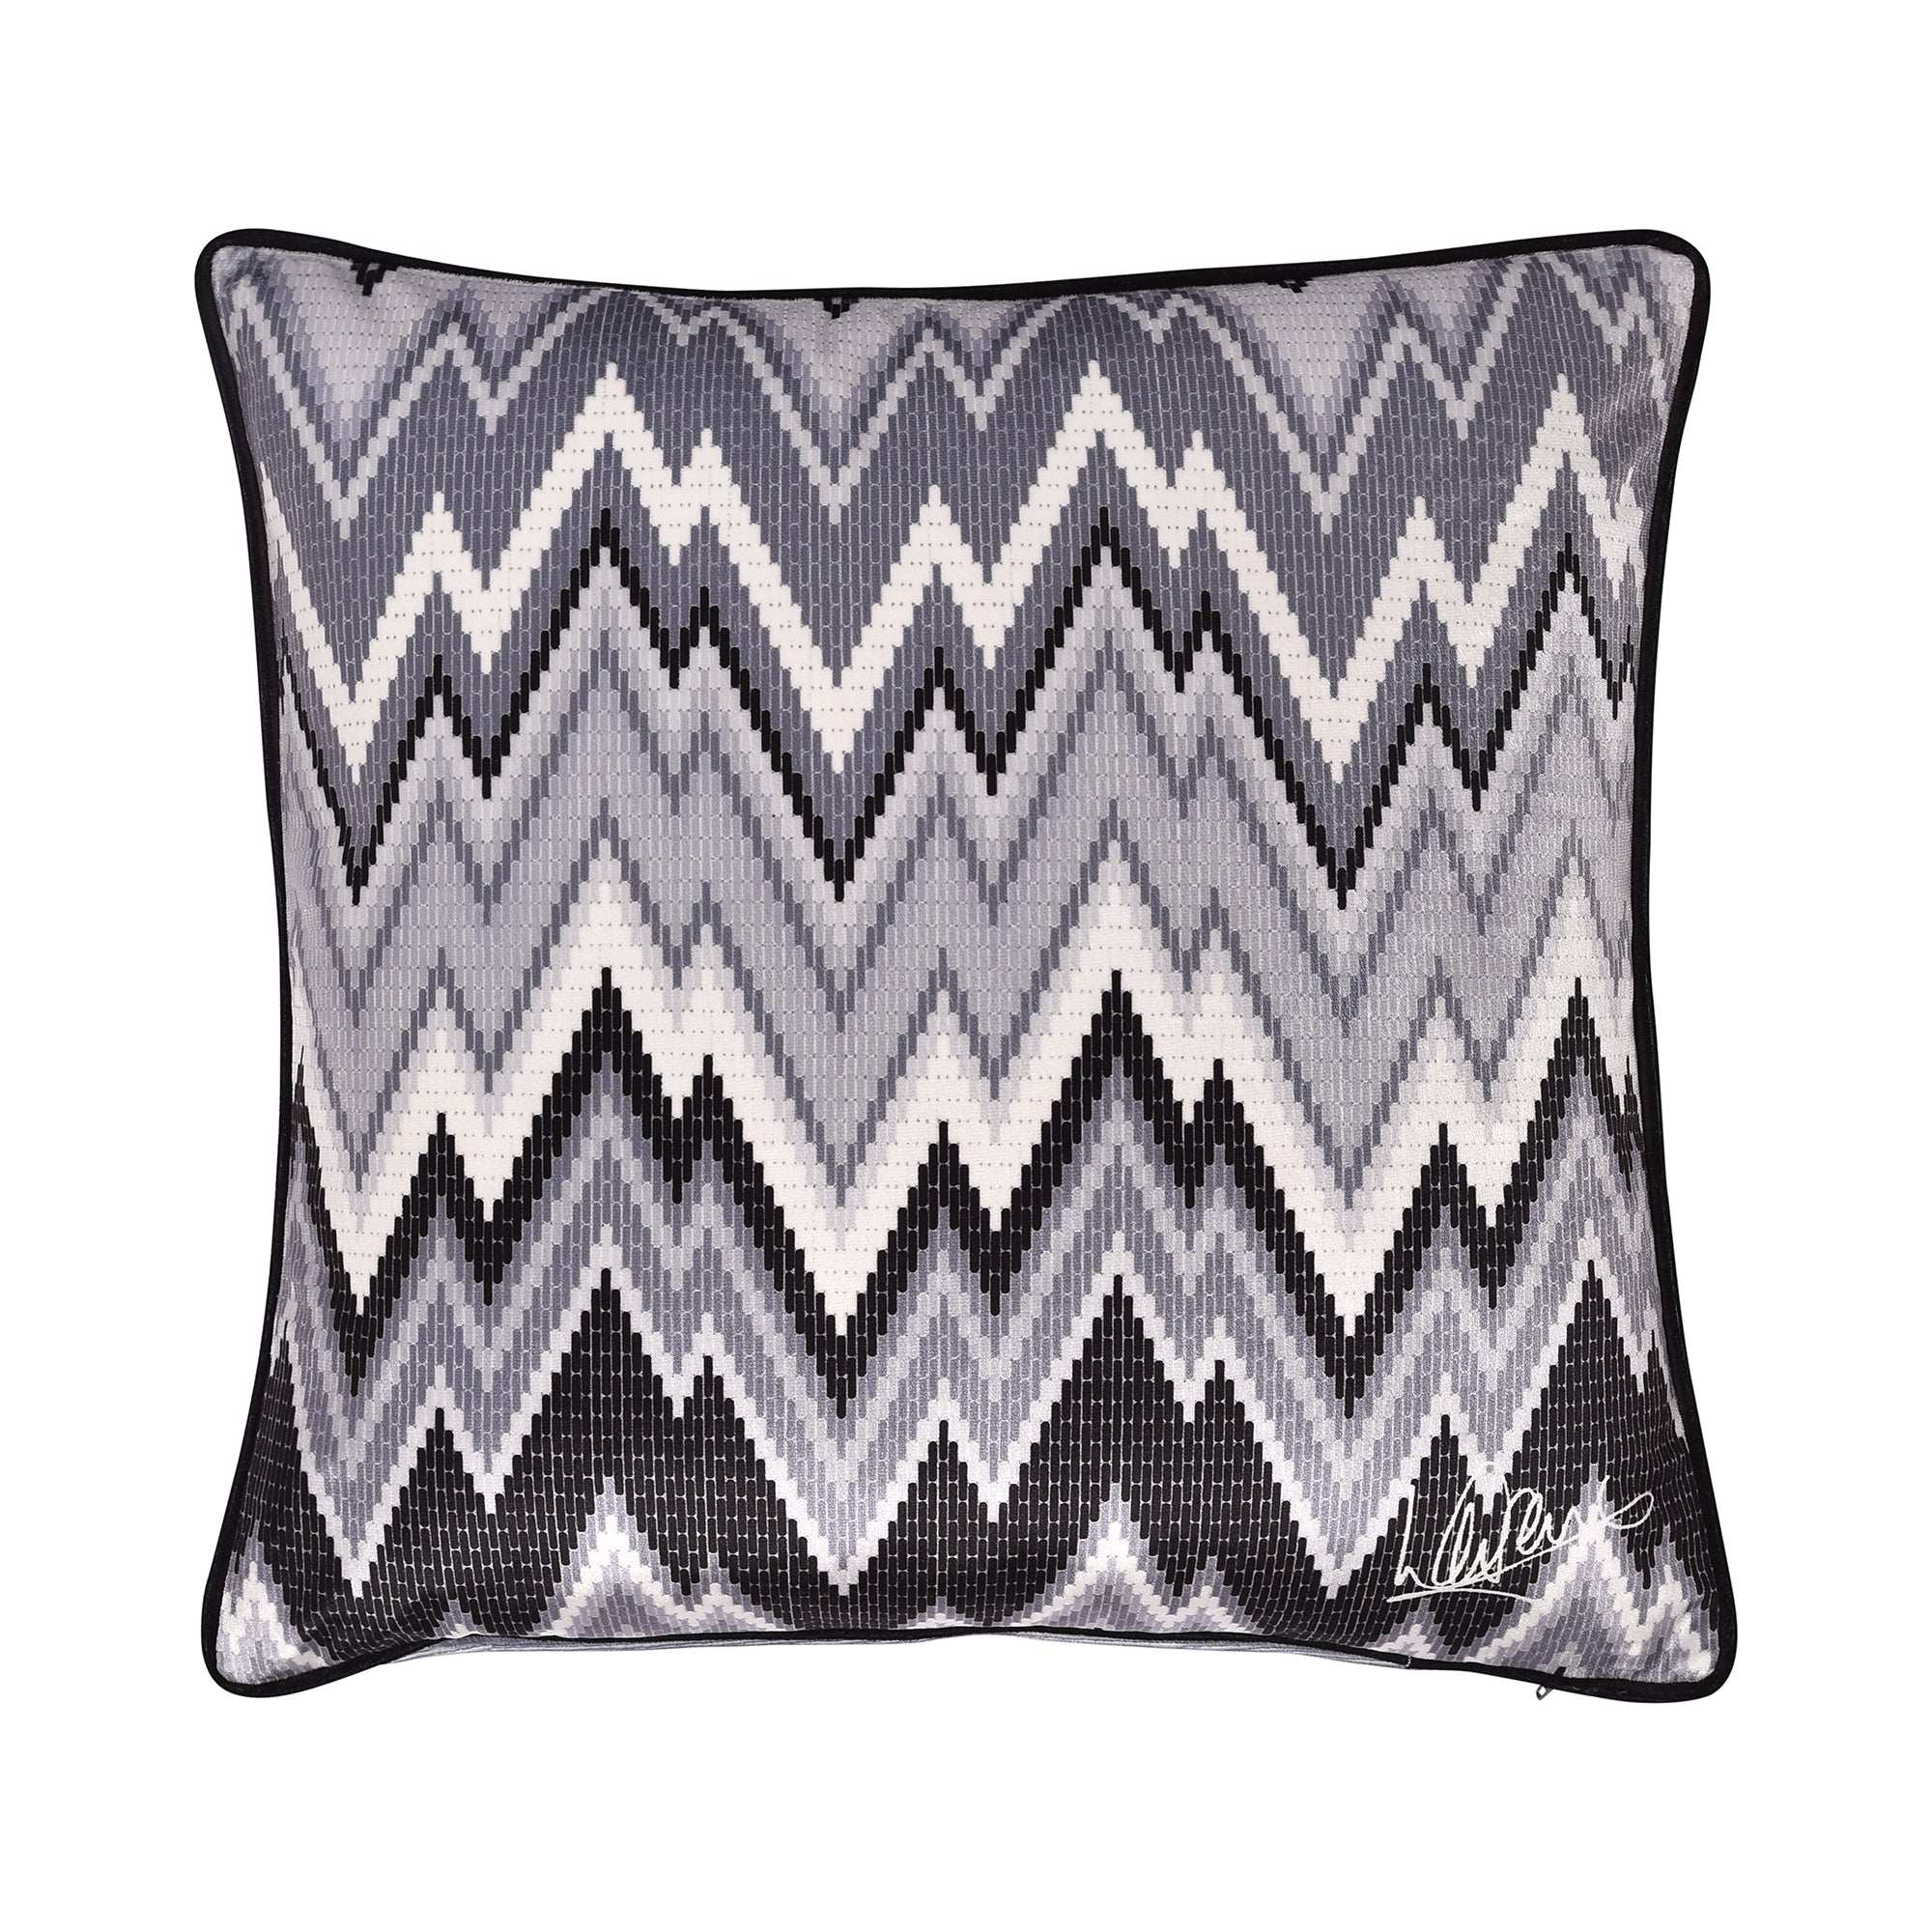 Pants on Fire Cushion by Laurence Llewelyn-Bowen in Black/White 43 x 43cm - Cushion - Laurence Llewelyn-Bowen